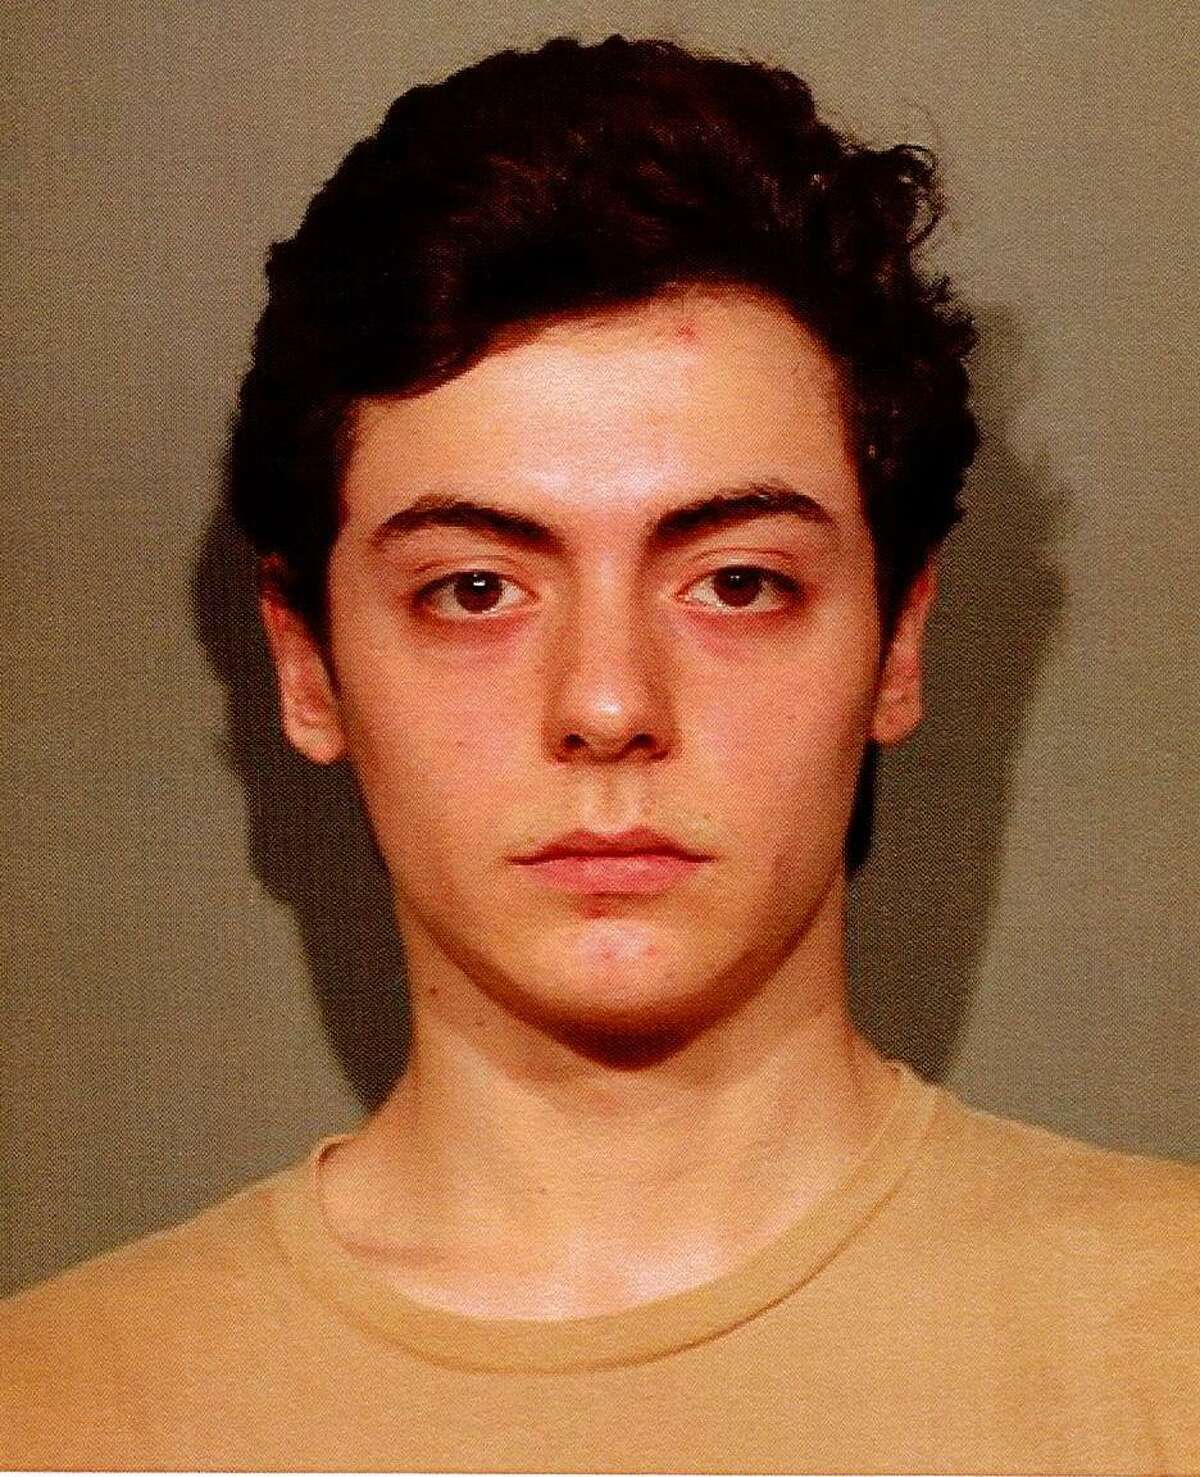 New Canaan teen charged with violating protective order